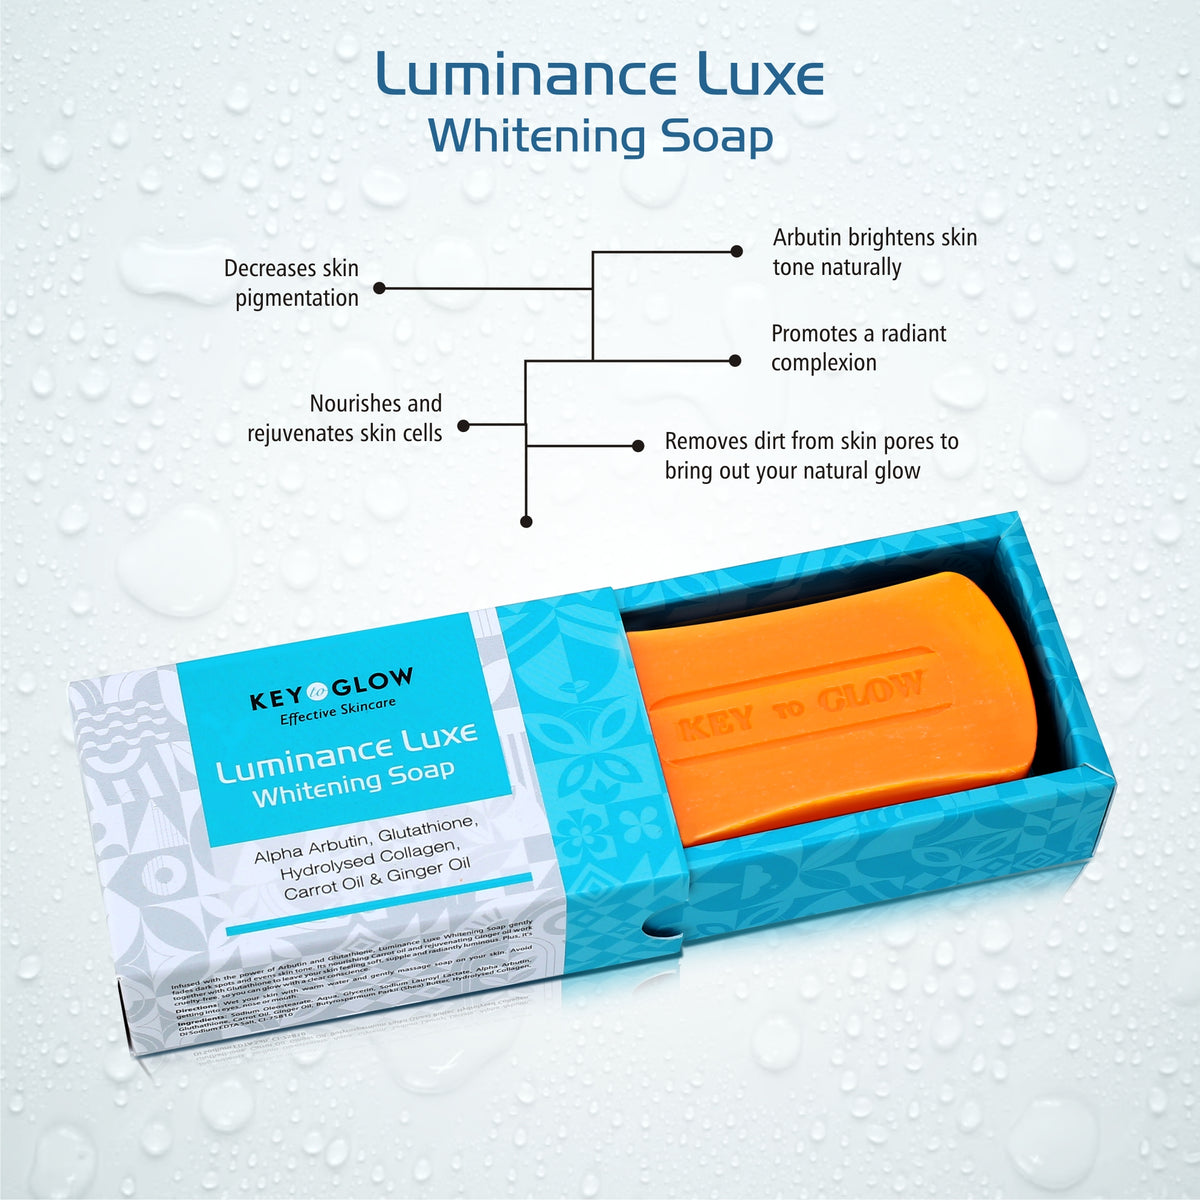 Luminance Luxe Whitening Soap Alpha Arbutin + Glutathione + Hydrolysed Collagen + Carrot Oil + Ginger Oil - 125g - Key to Glow 